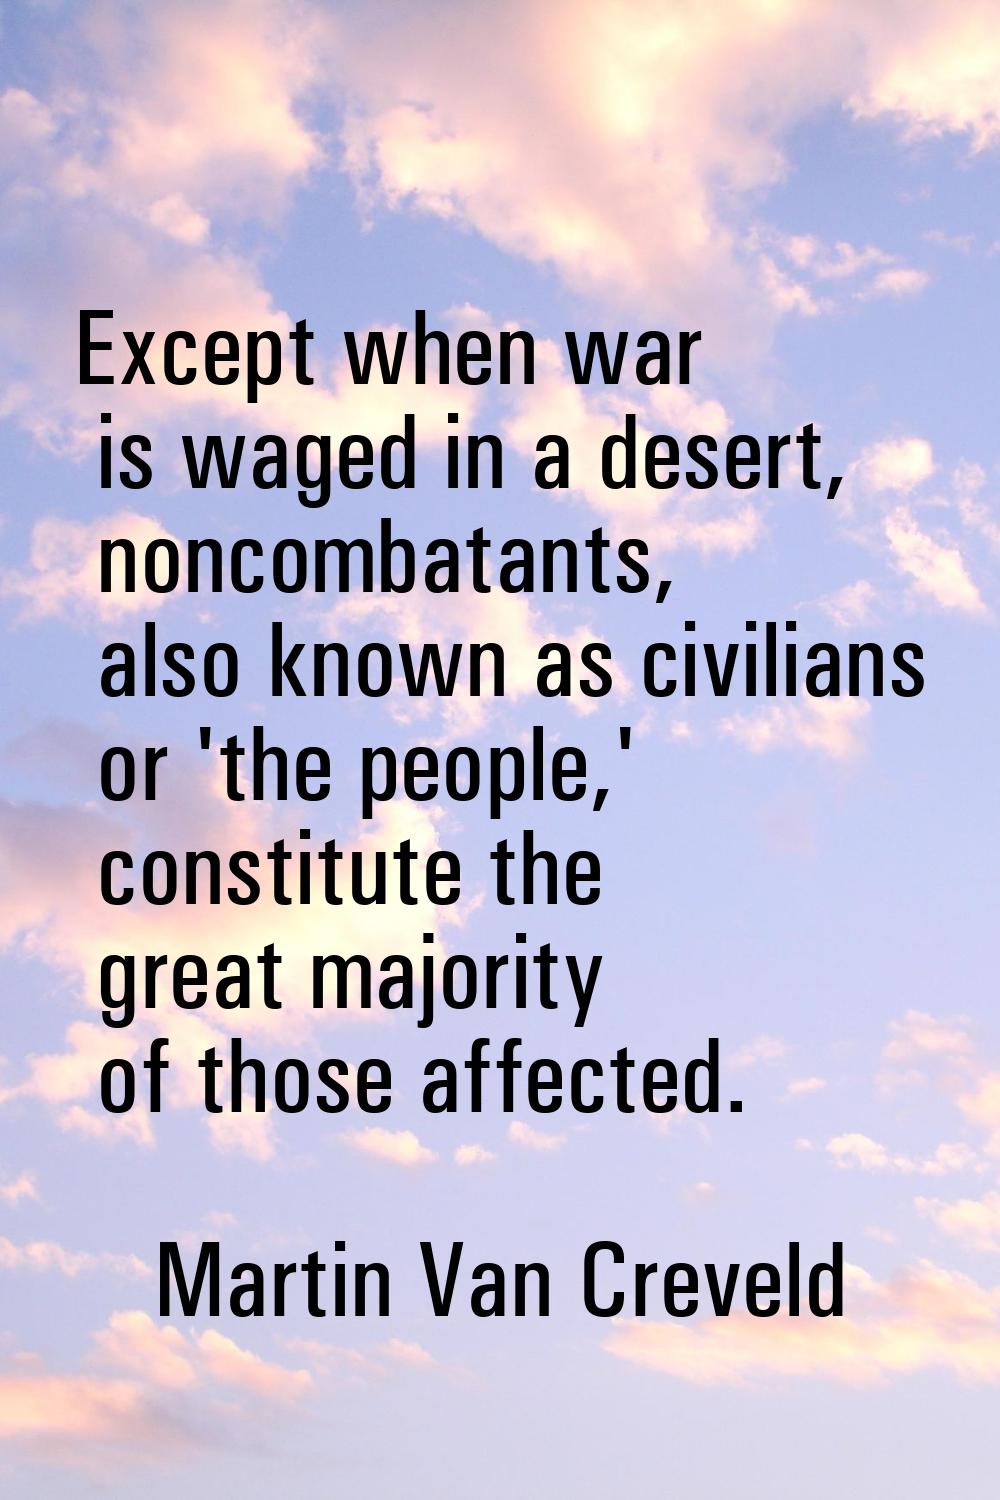 Except when war is waged in a desert, noncombatants, also known as civilians or 'the people,' const